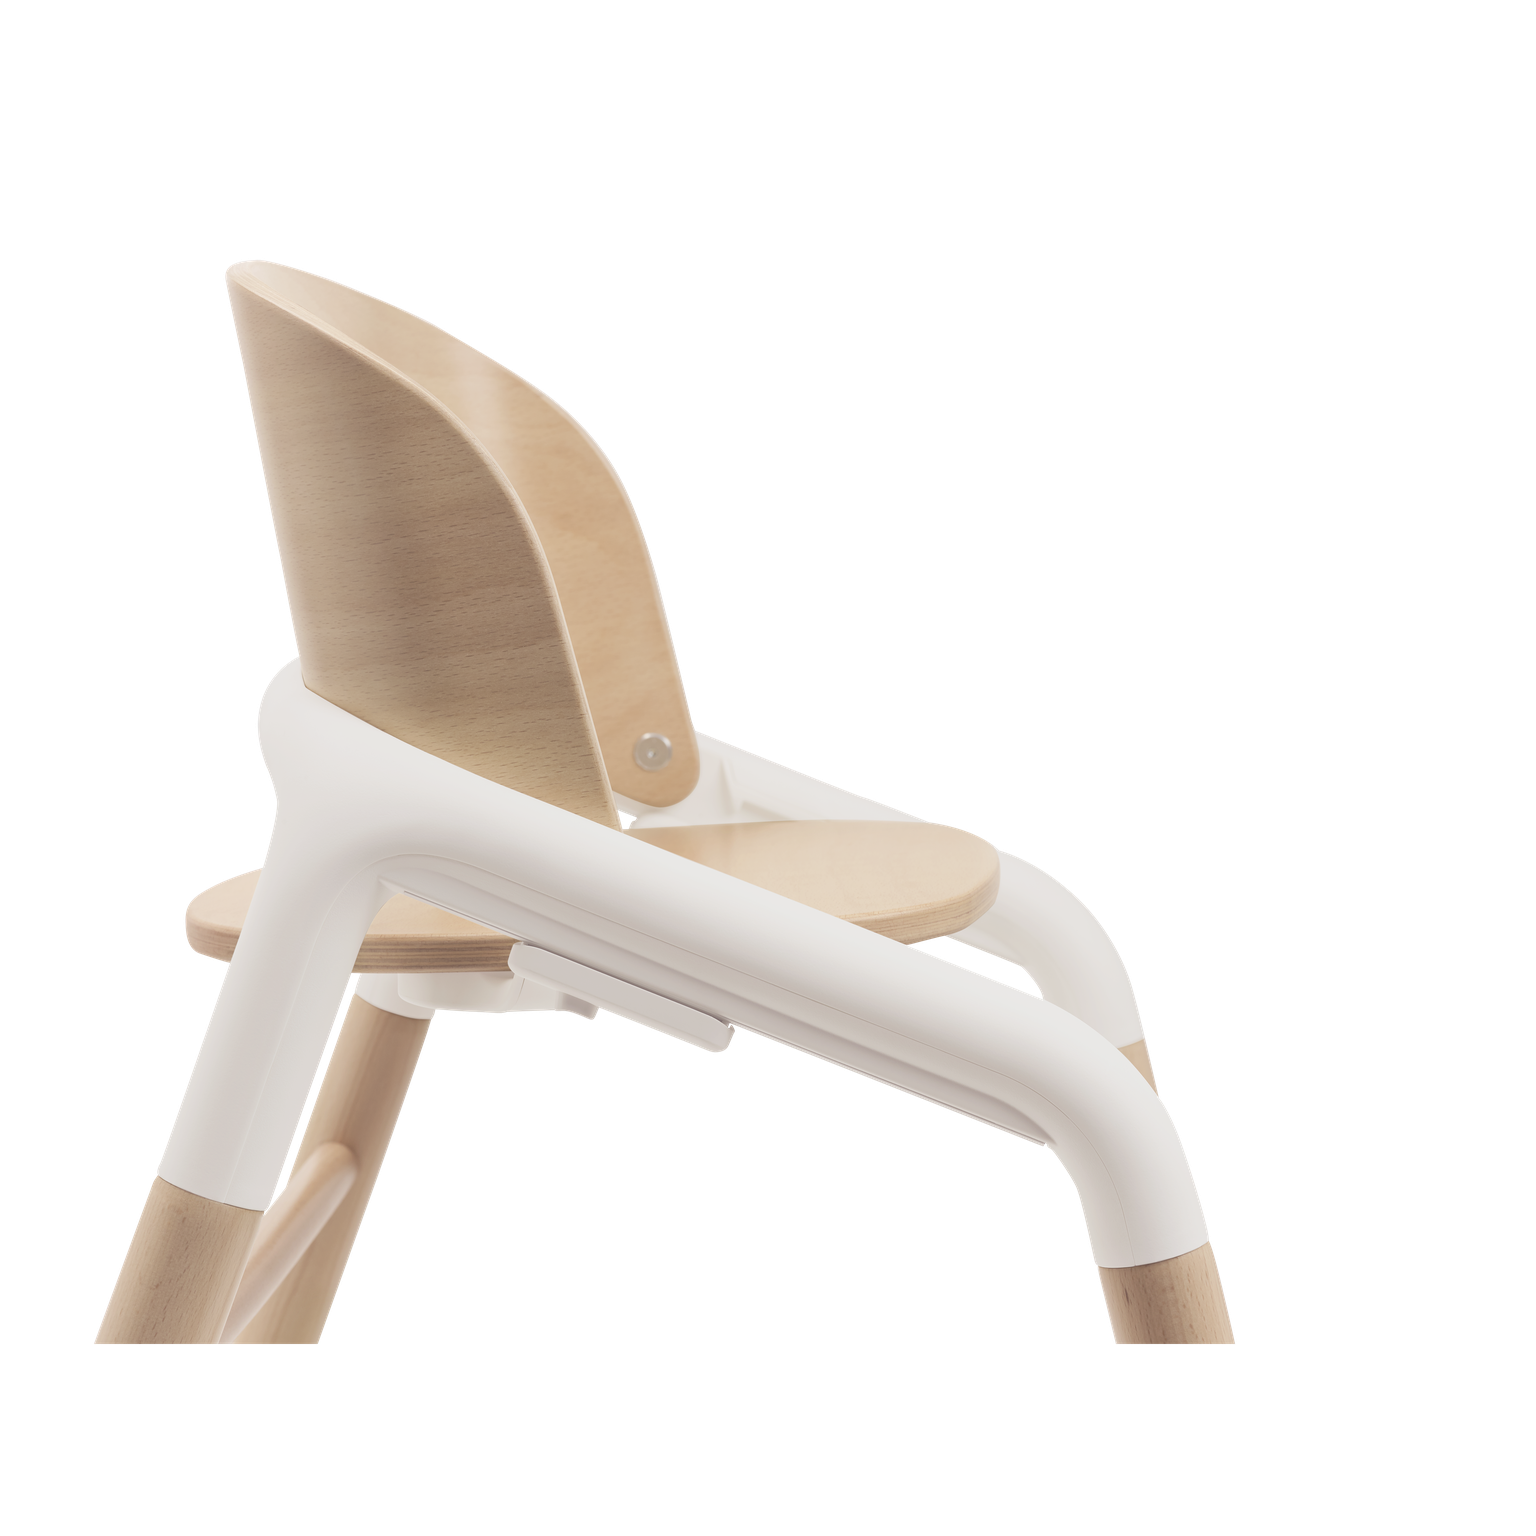 Bugaboo Giraffe Highchair with Baby Set, Pillow & Tray | Neutral Wood/White & Arctic White | Direct4baby | Free Delivery